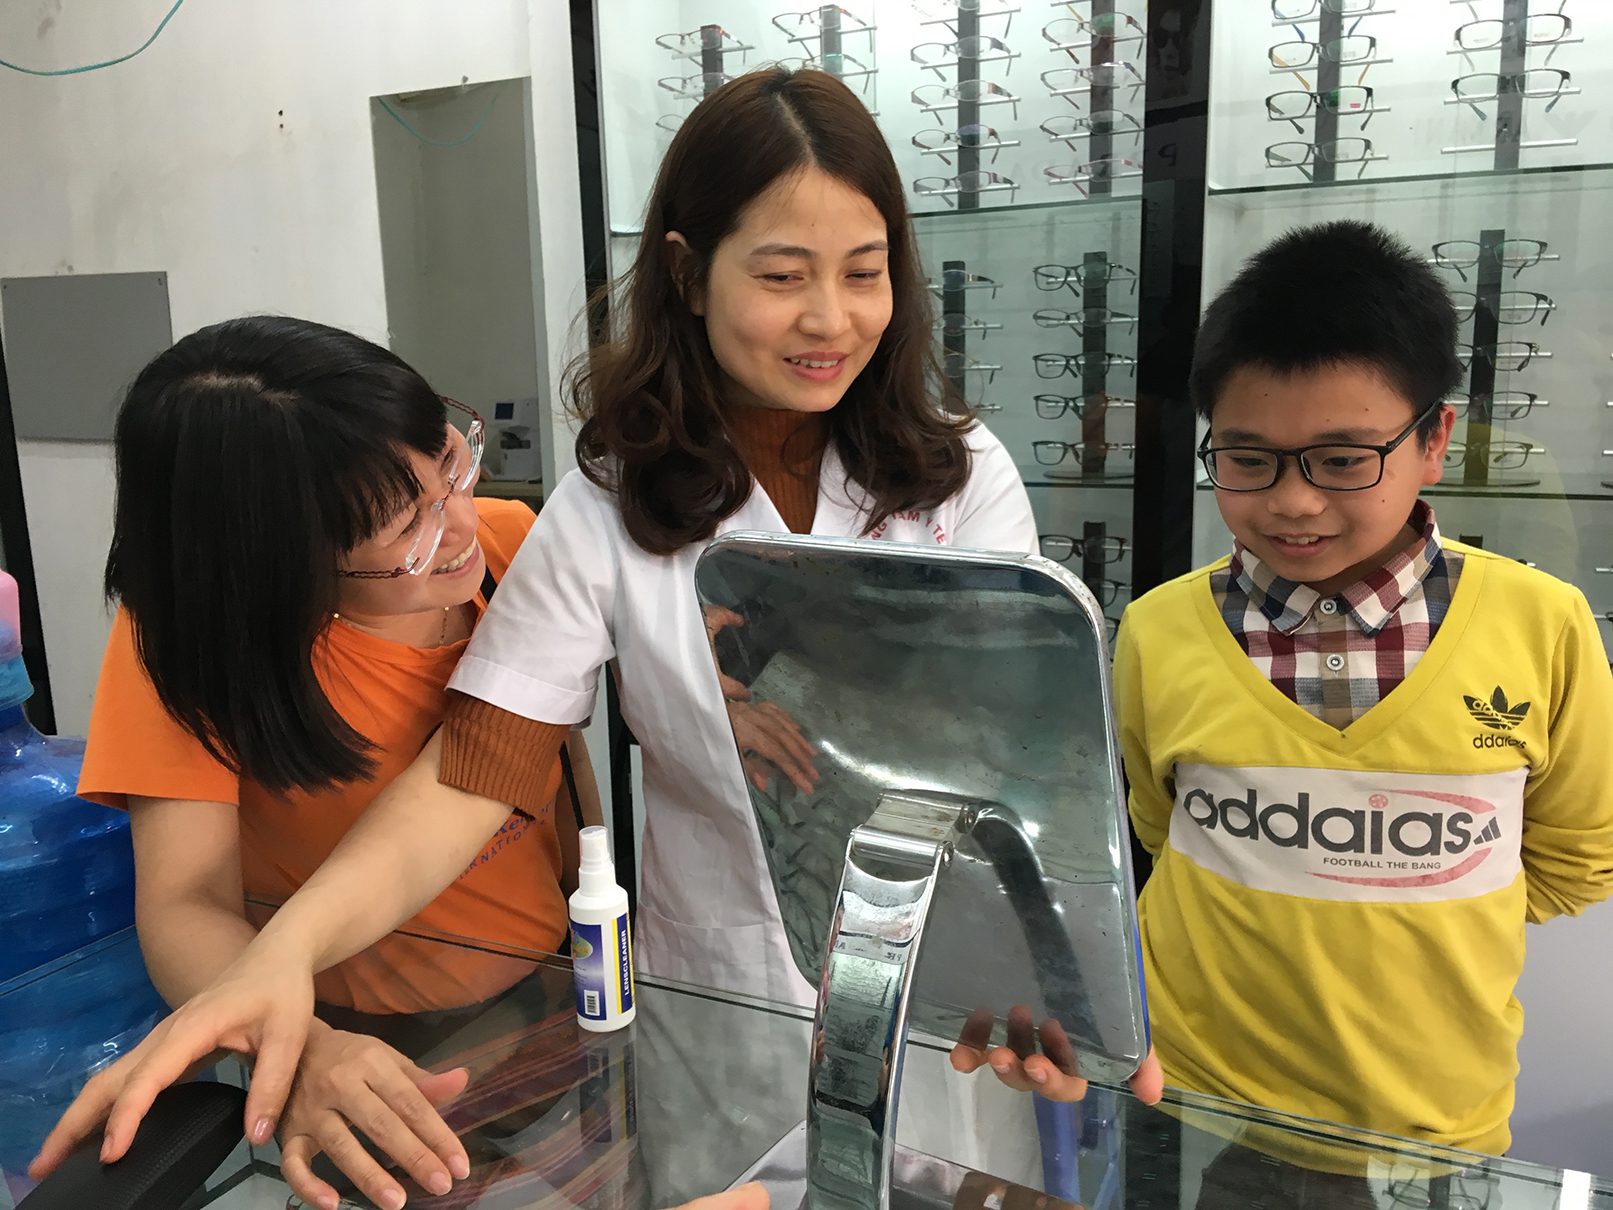 Ngoc looks on as an optician helps a boy choose eye glasses that will not only help him see, but that he will also be proud to wear